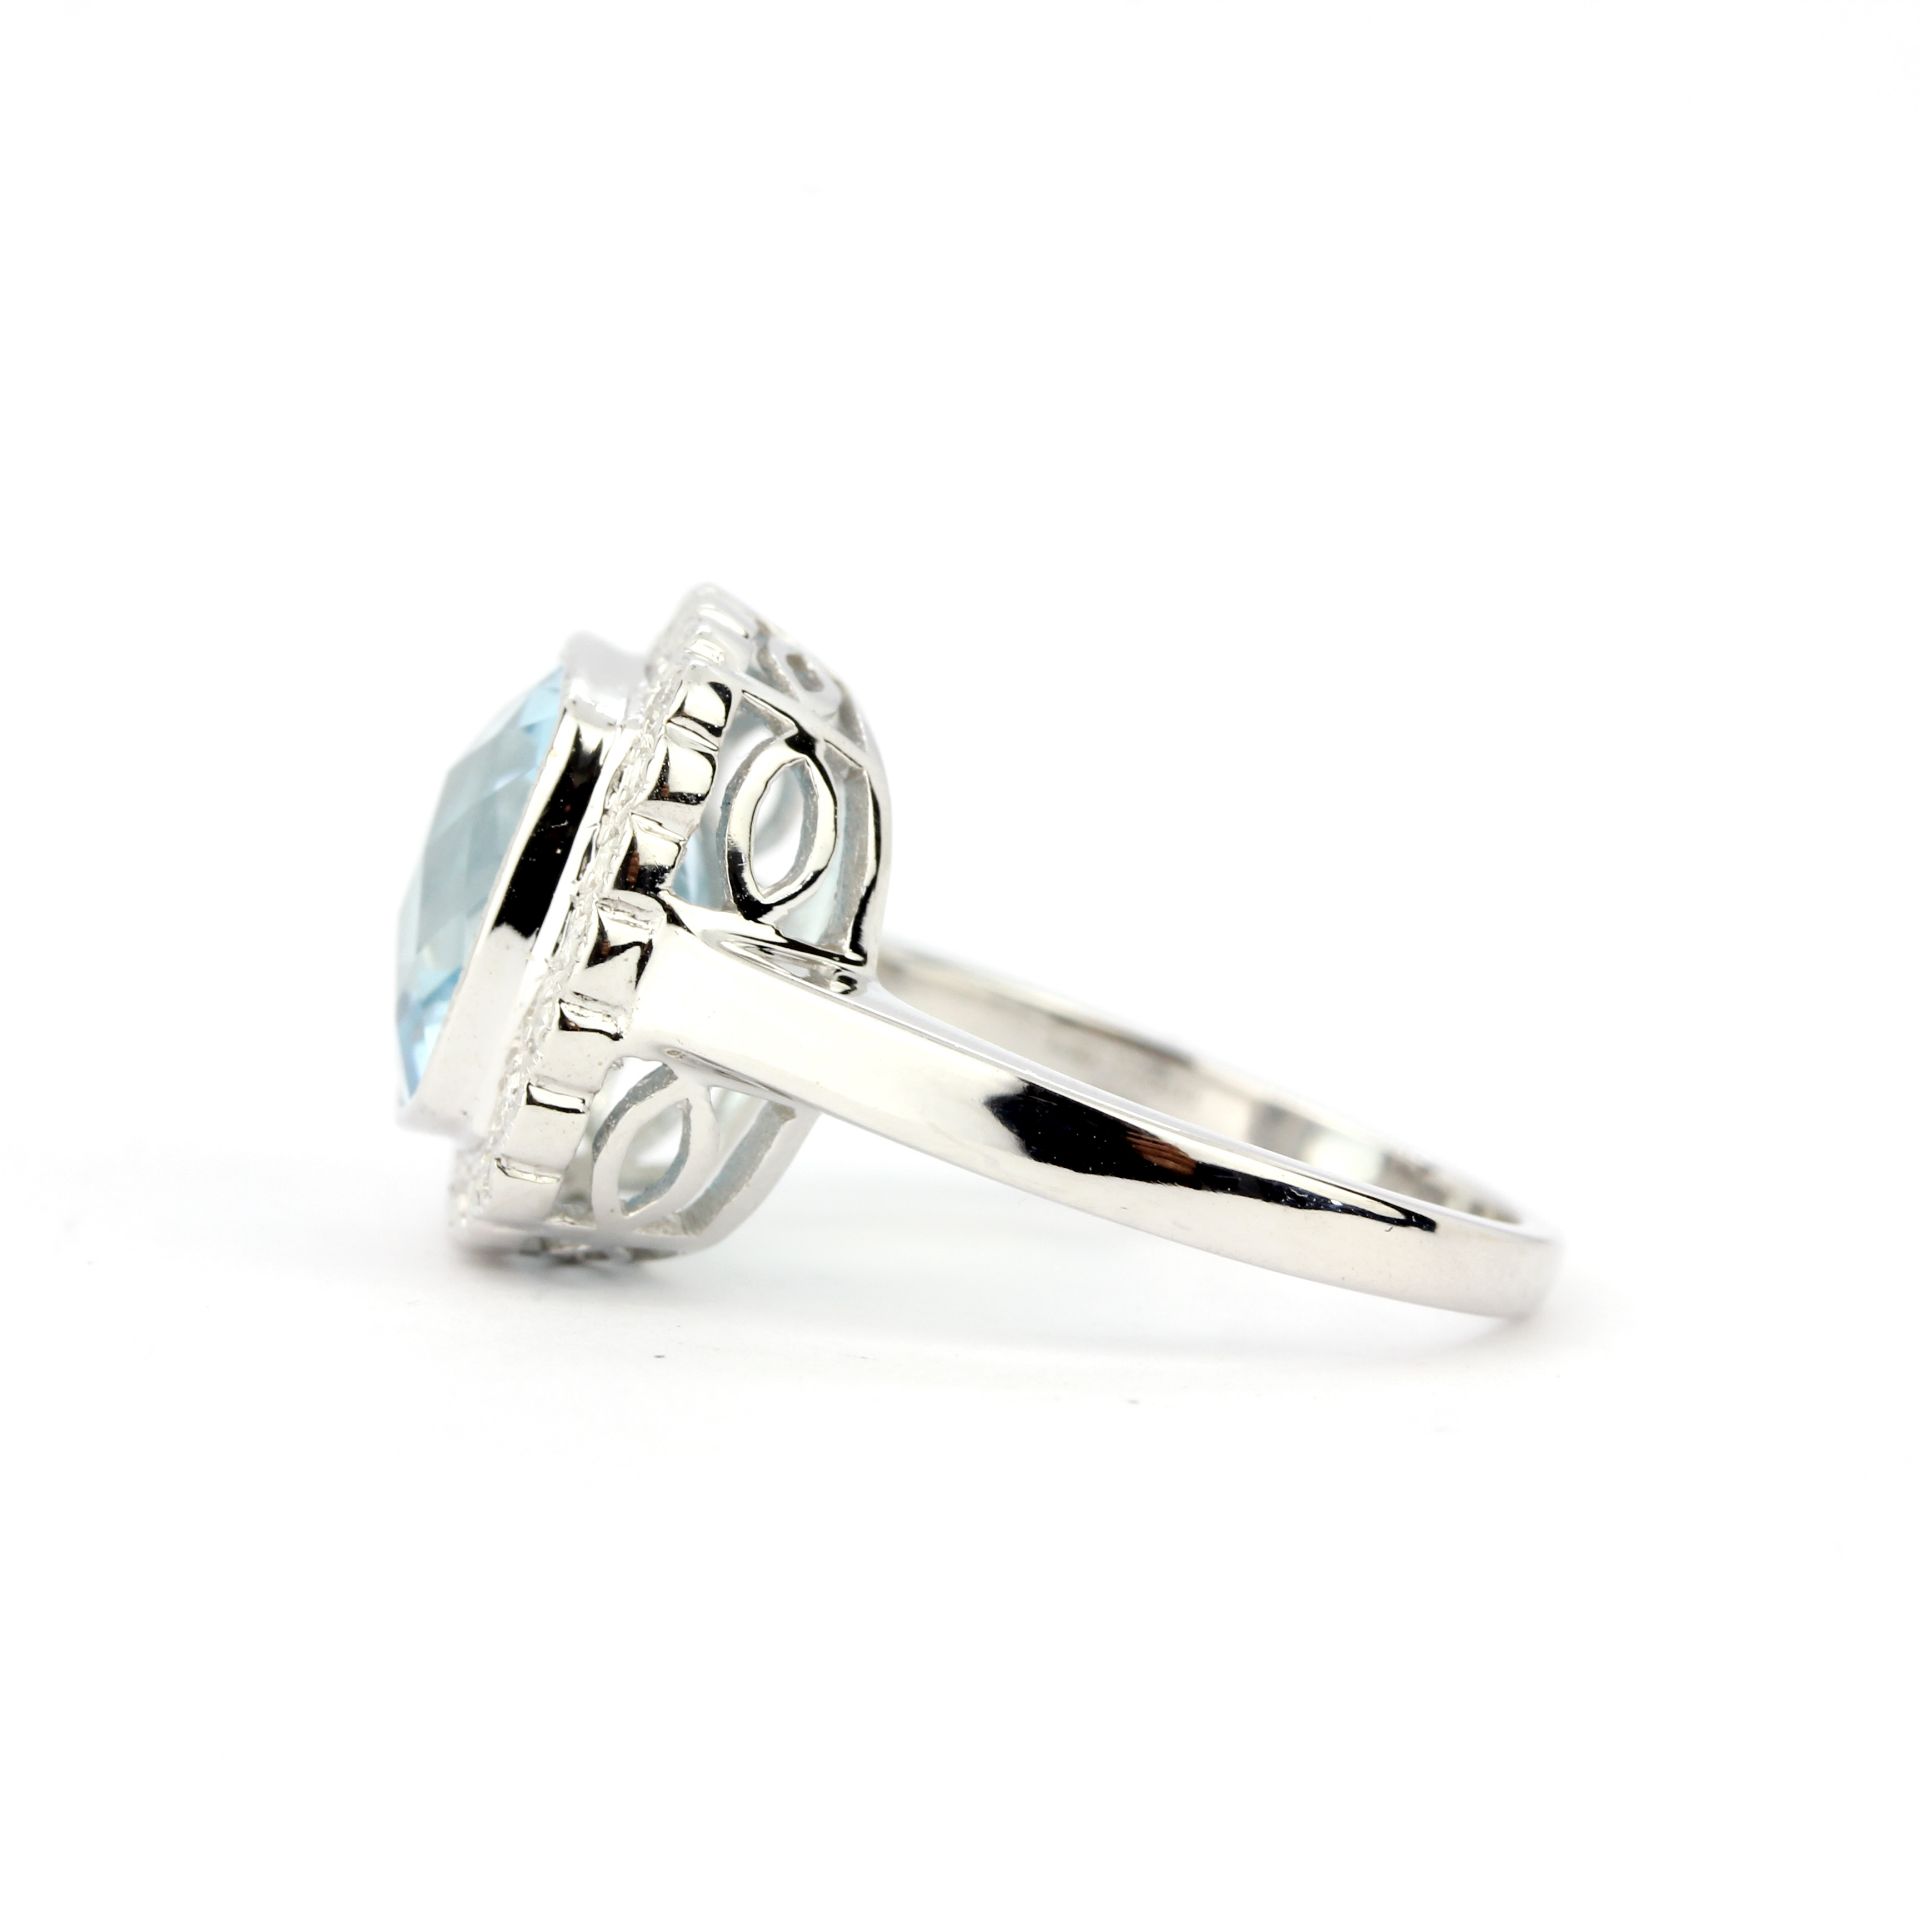 A 9ct white gold ring set with a checker board aquamarine and diamonds, ring size L. - Image 4 of 4